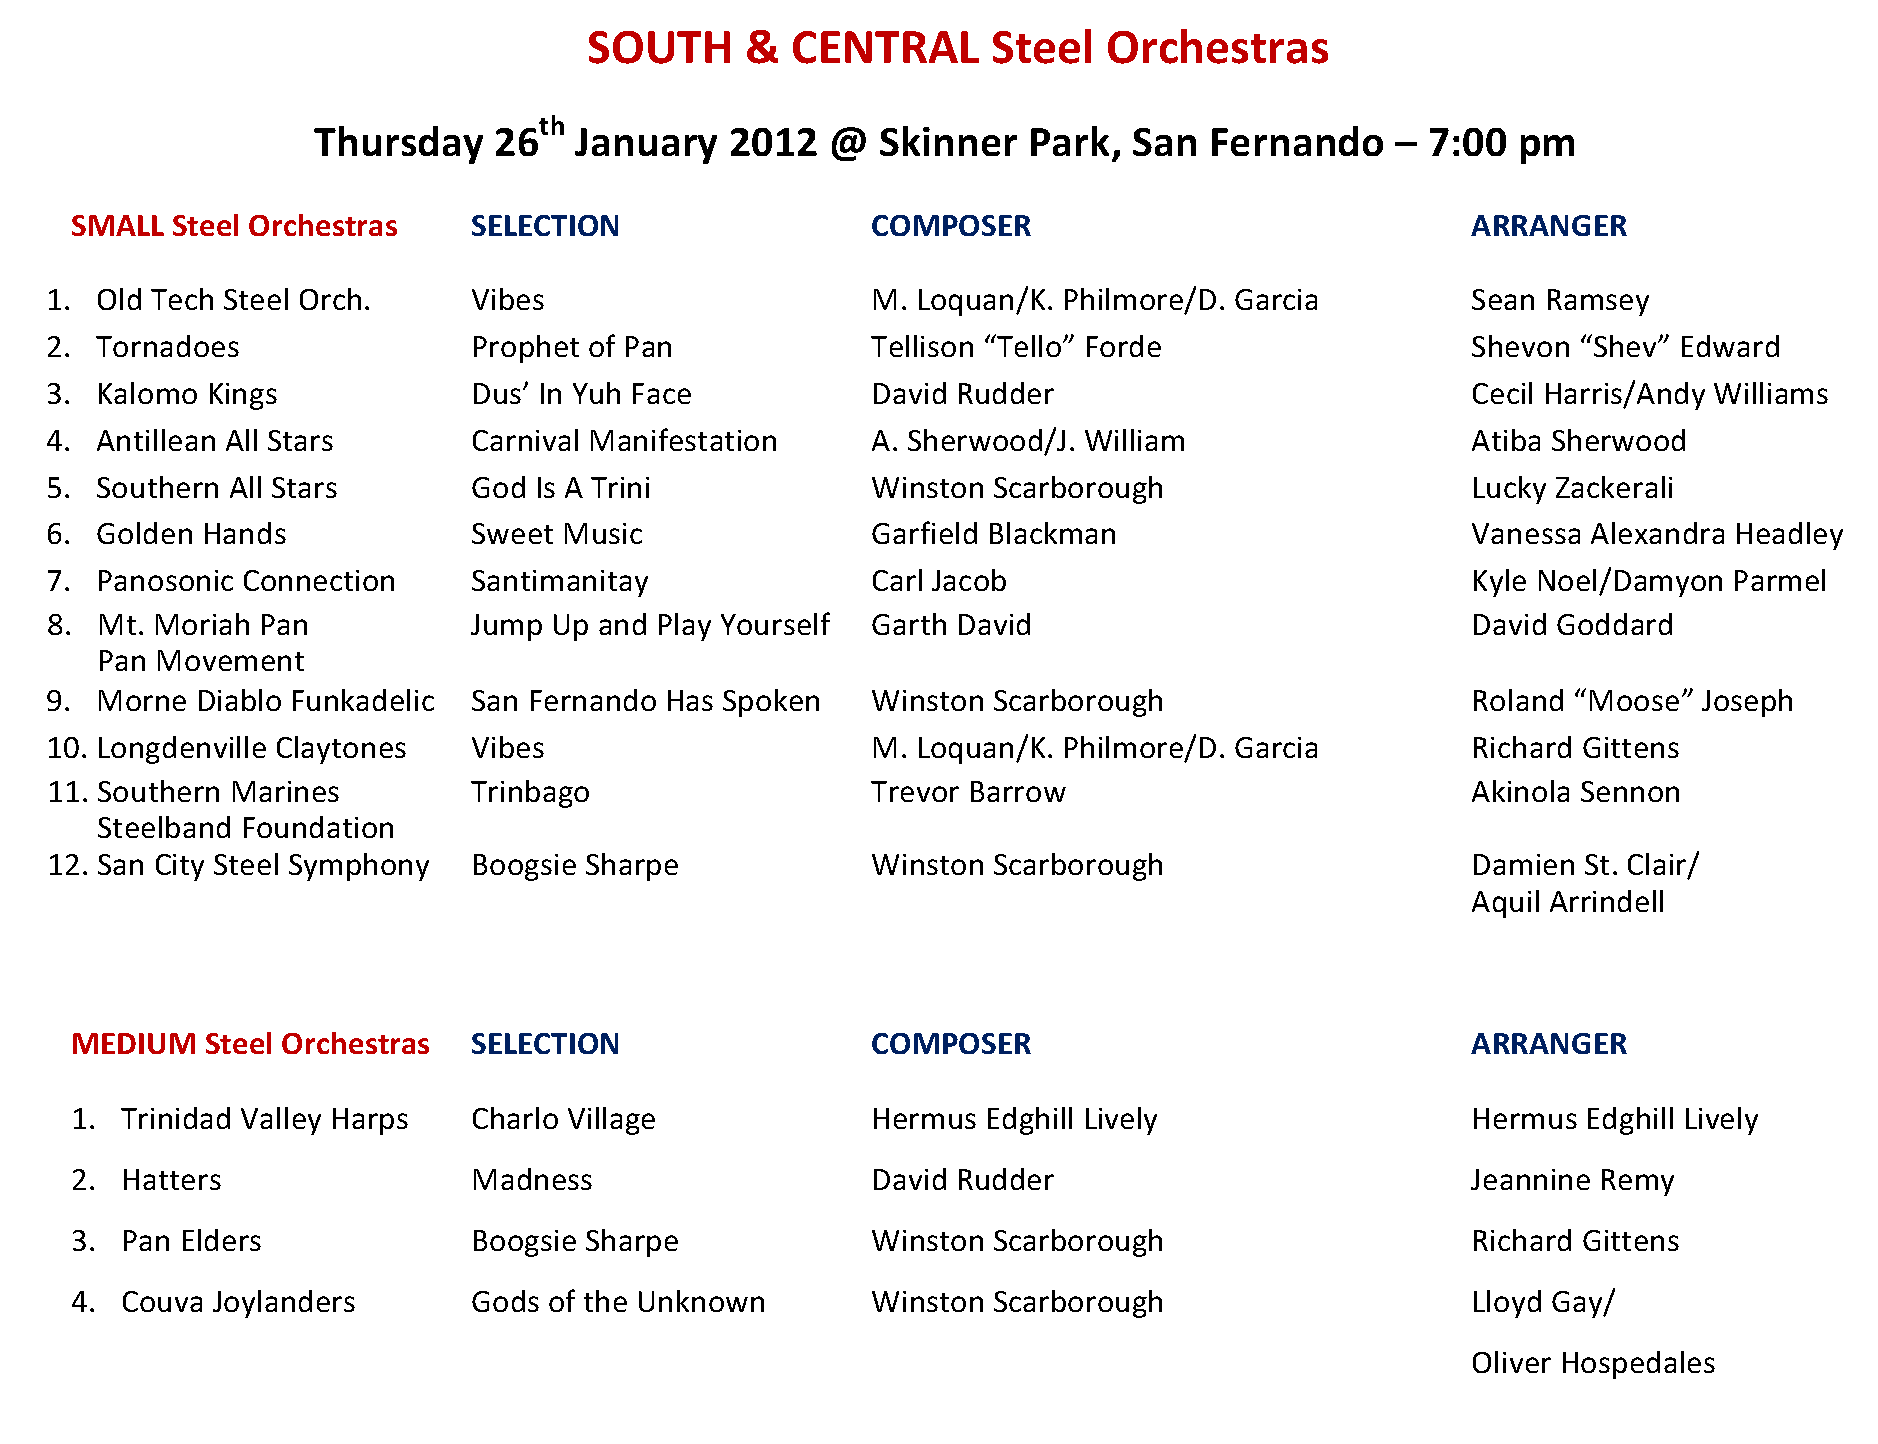 image file of south-central small and medium steel orchestra prelims